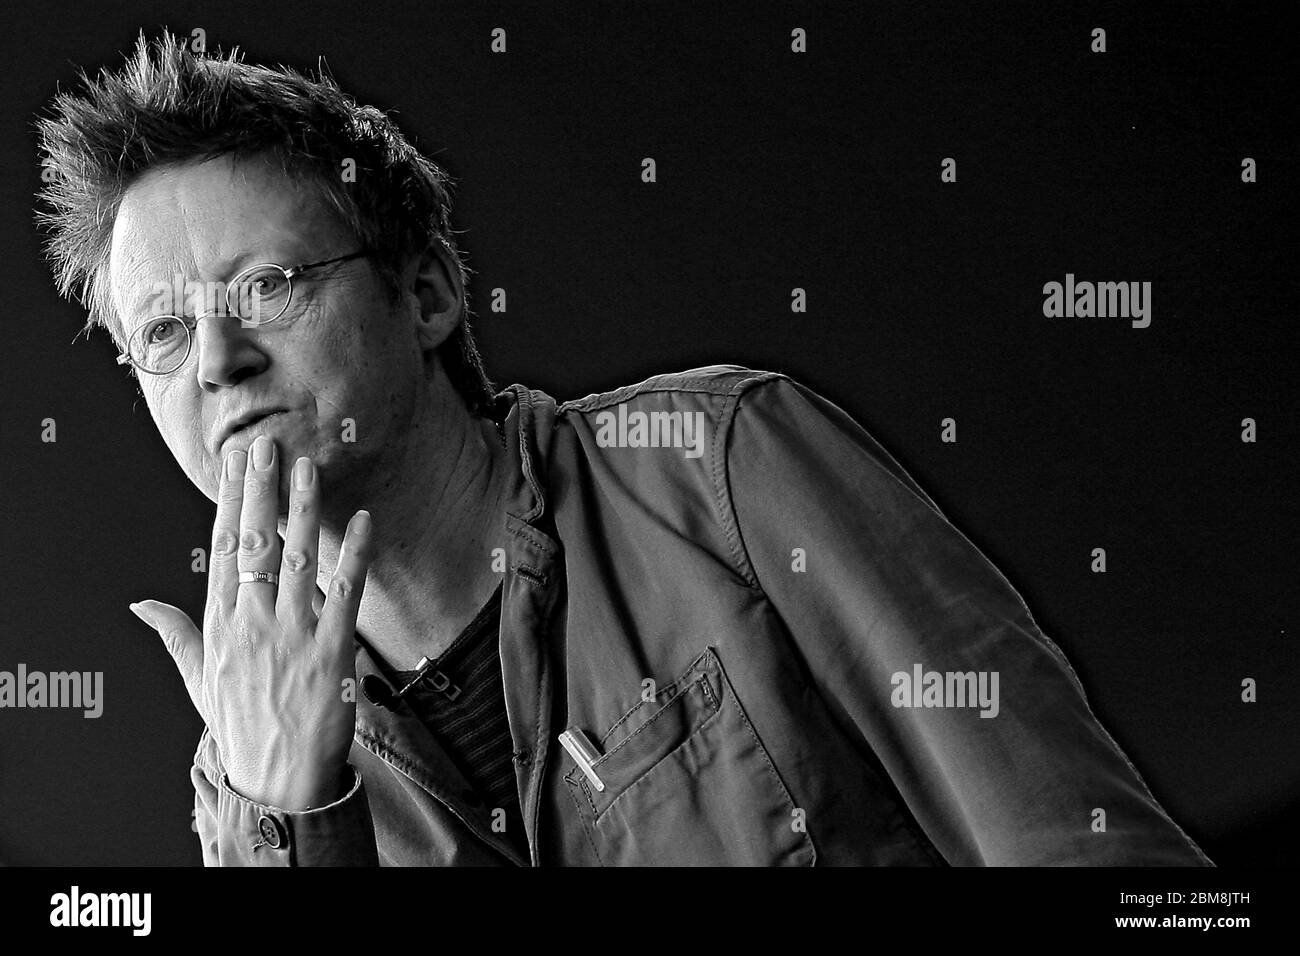 Simon Mayo BBC radio presenter and childrens author, on stage at Hay Festival May 25 2013. Hay-On-Wye Powys, Wales  ©PRWPhot.ography Stock Photo